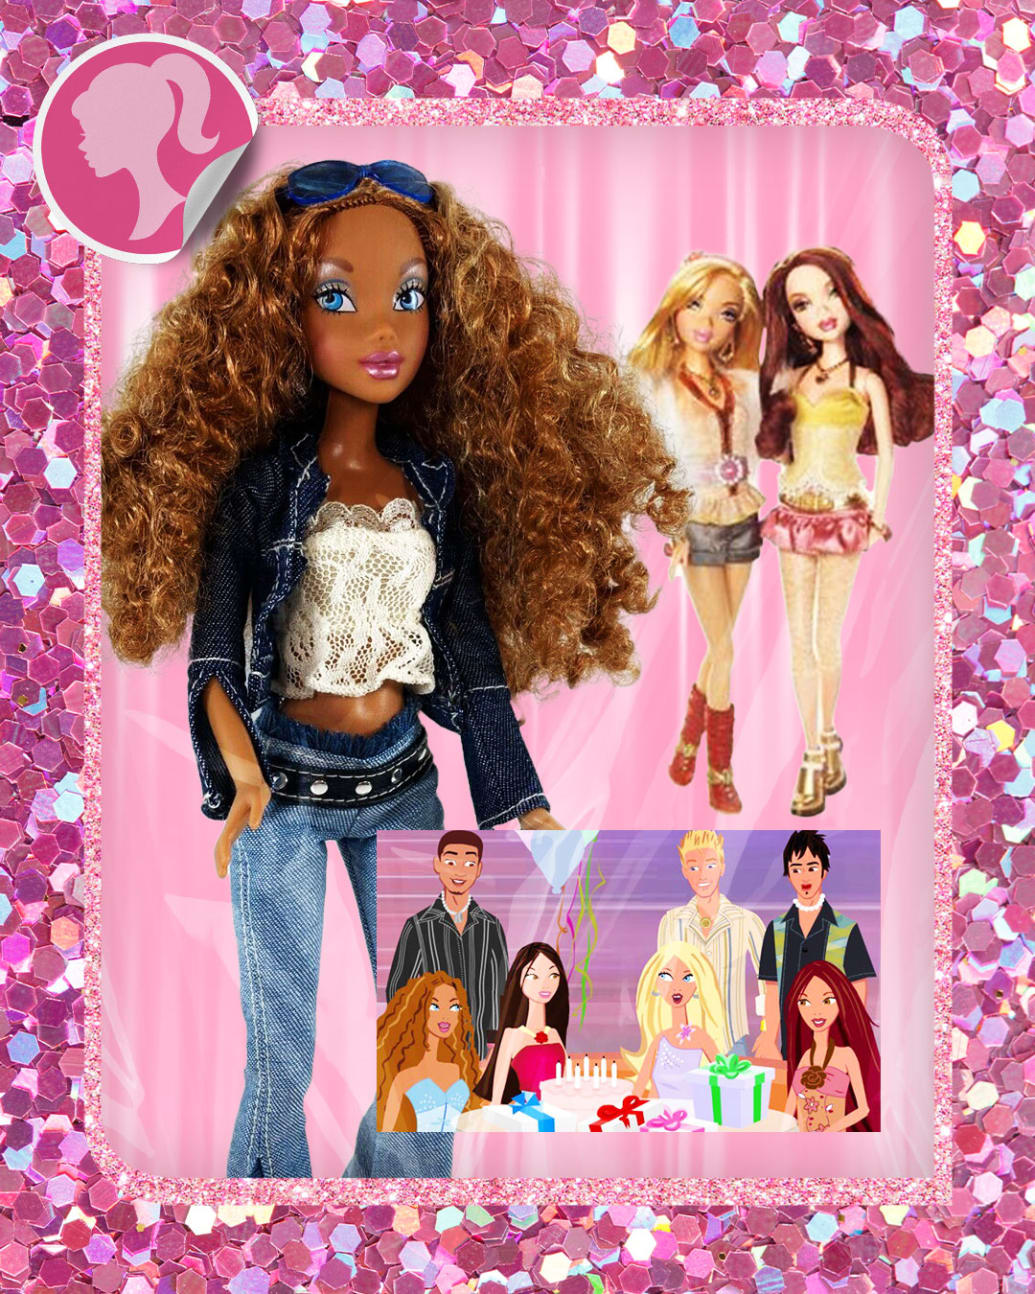 A photo illustration featuring the My Scene Barbies